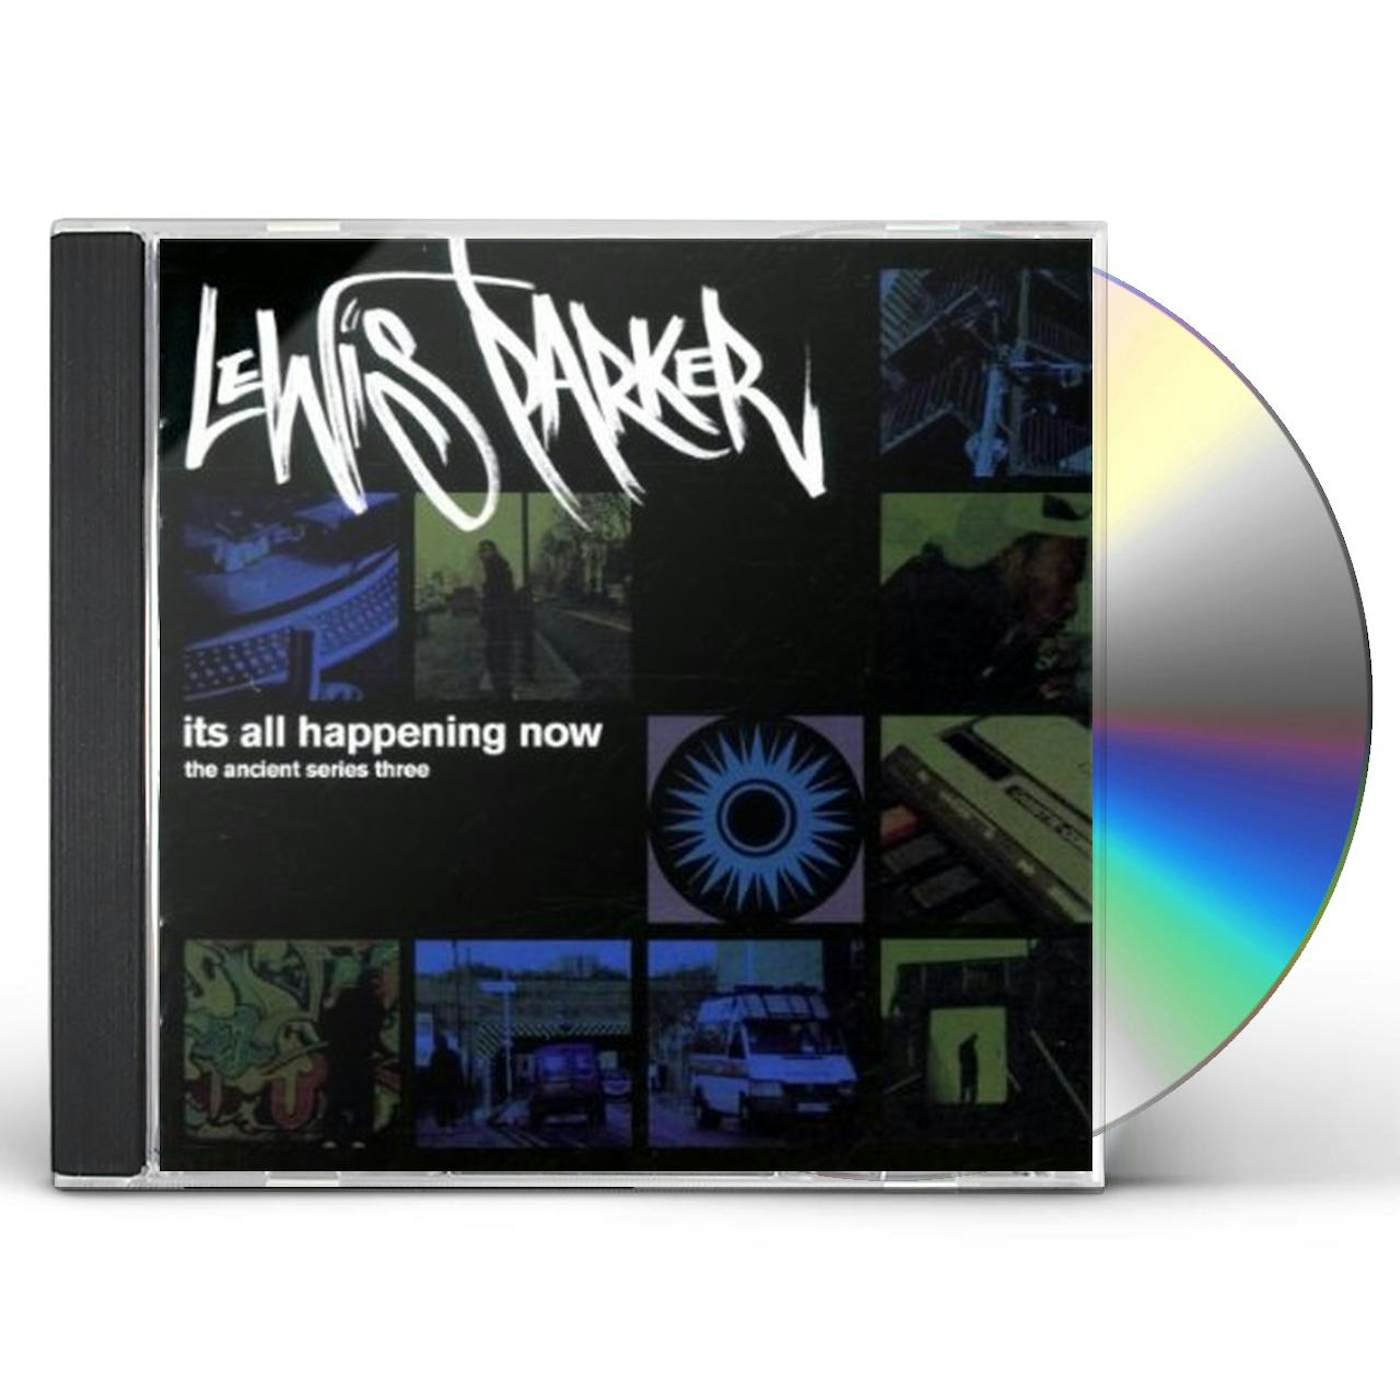 Lewis Parker ITS ALL HAPPENING NOW CD